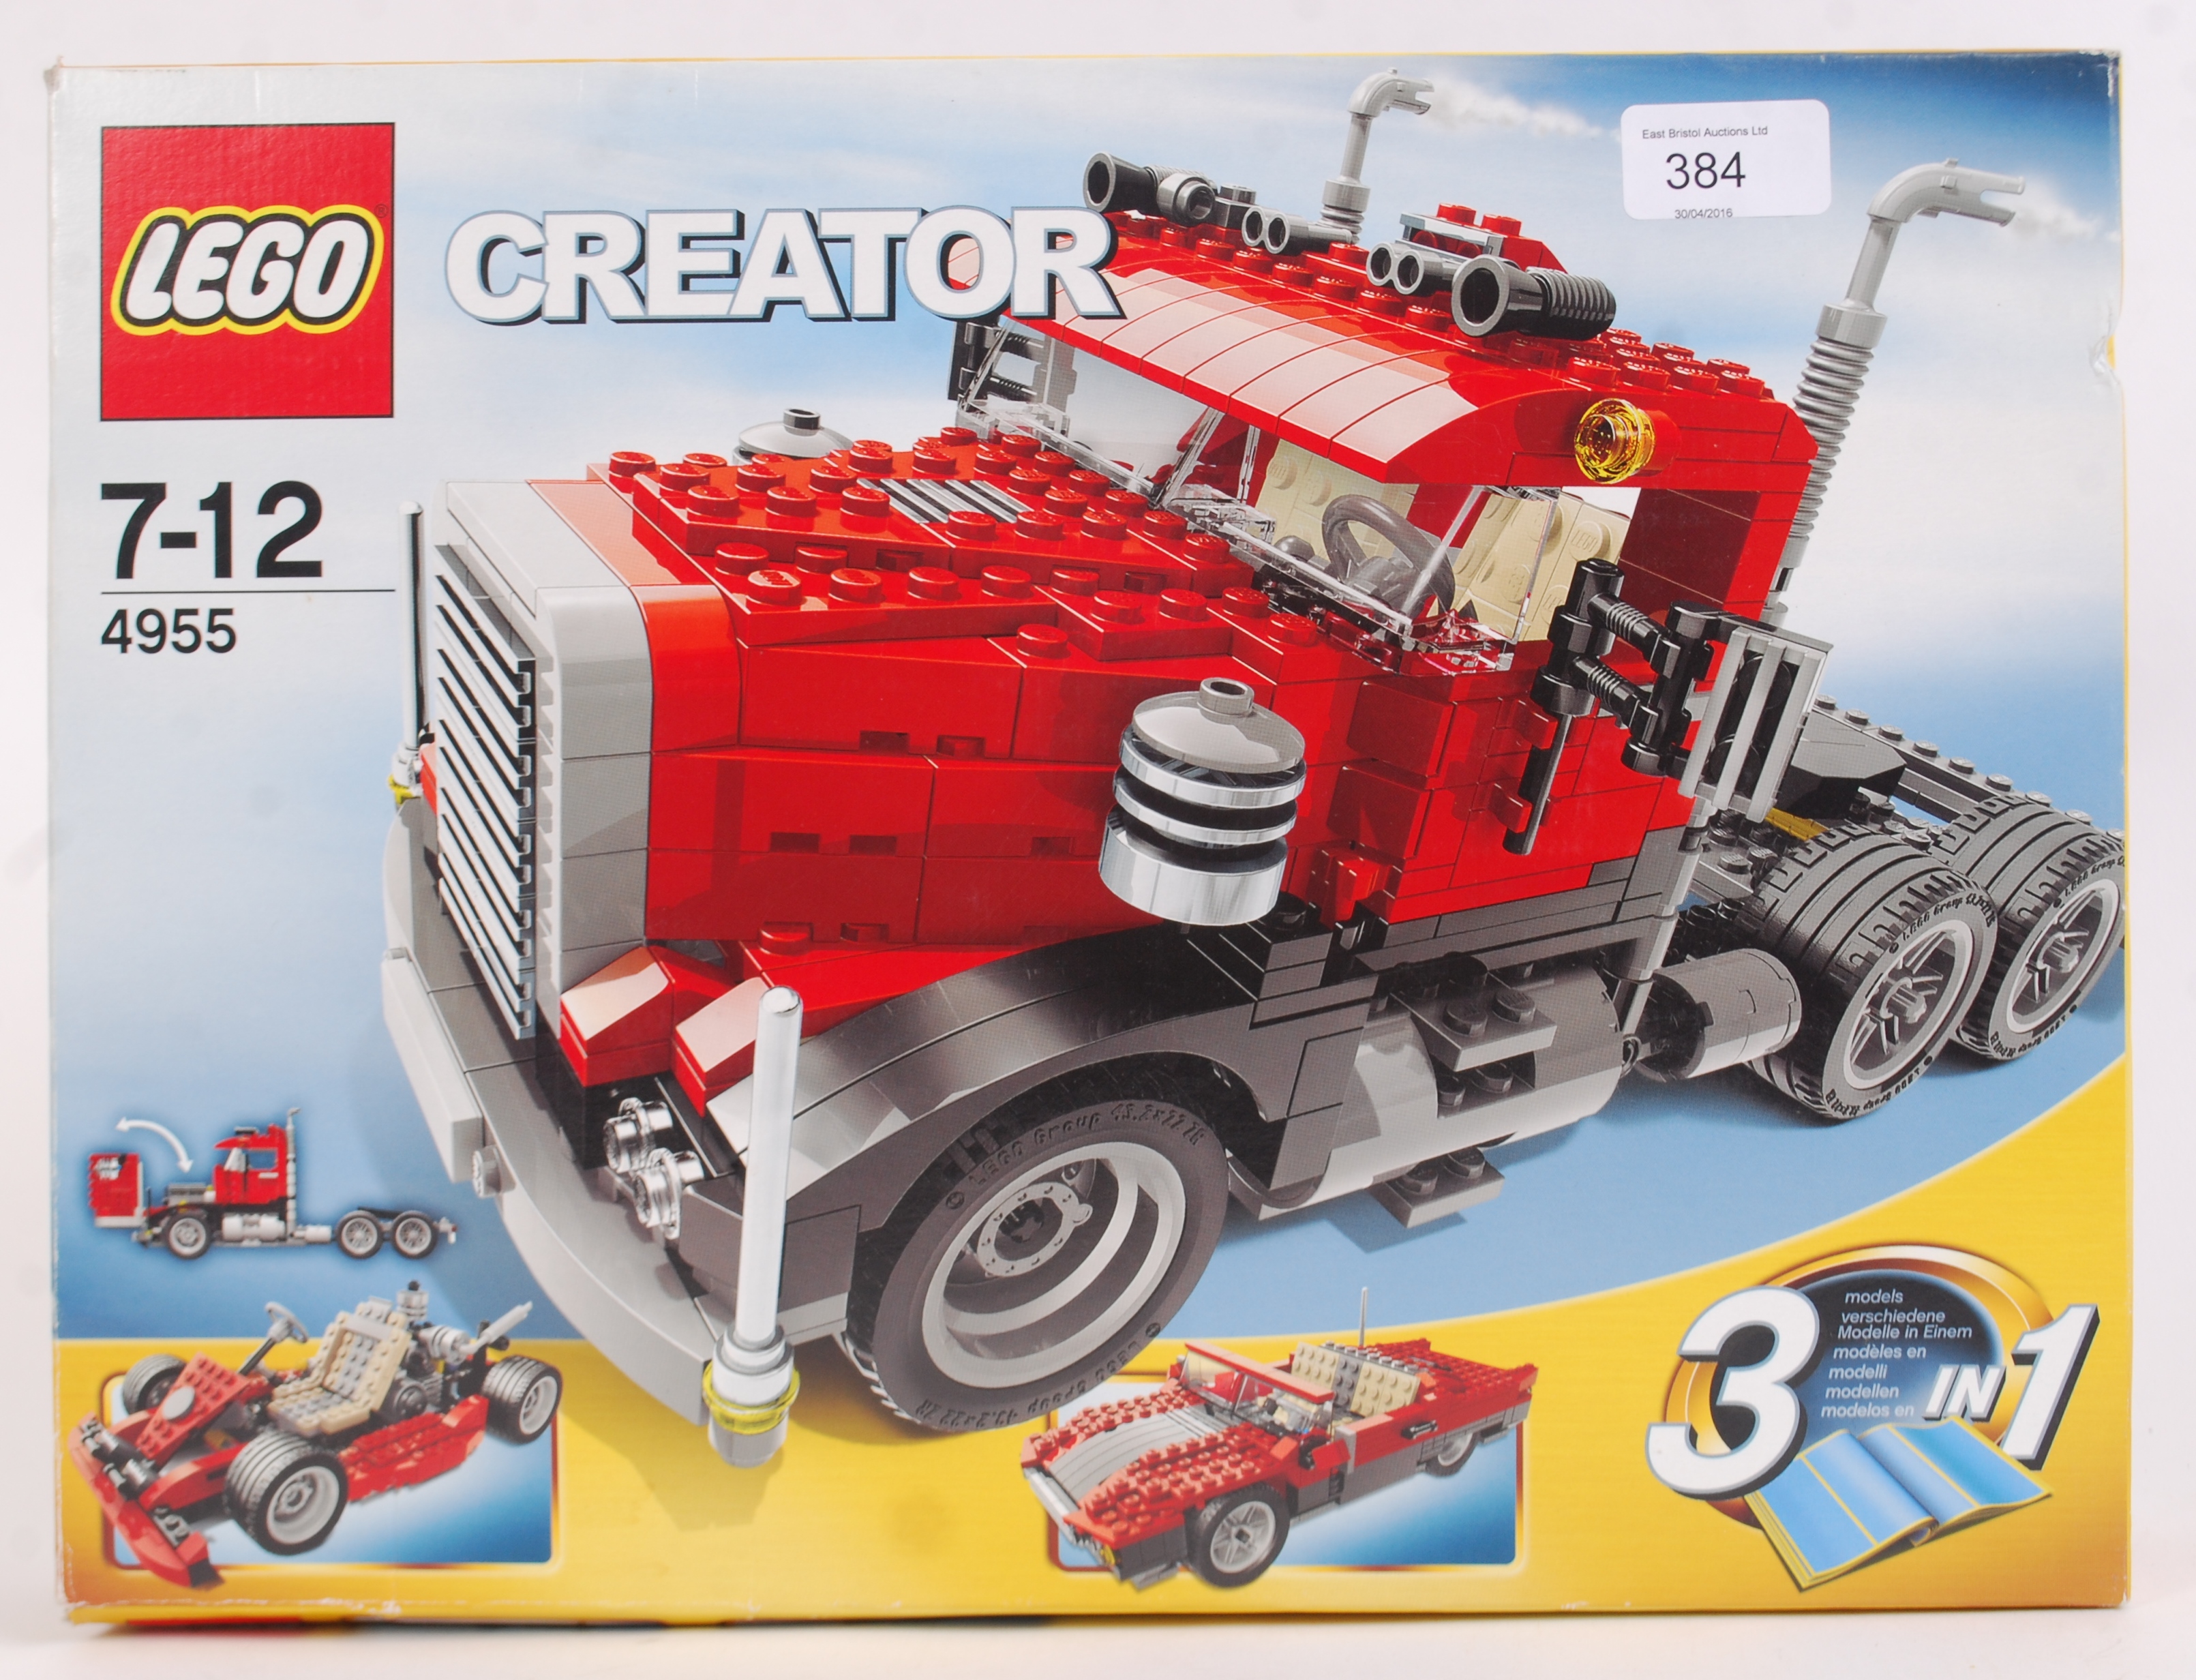 LEGO: A Lego Creator set 4955. With instructions, within the original box.